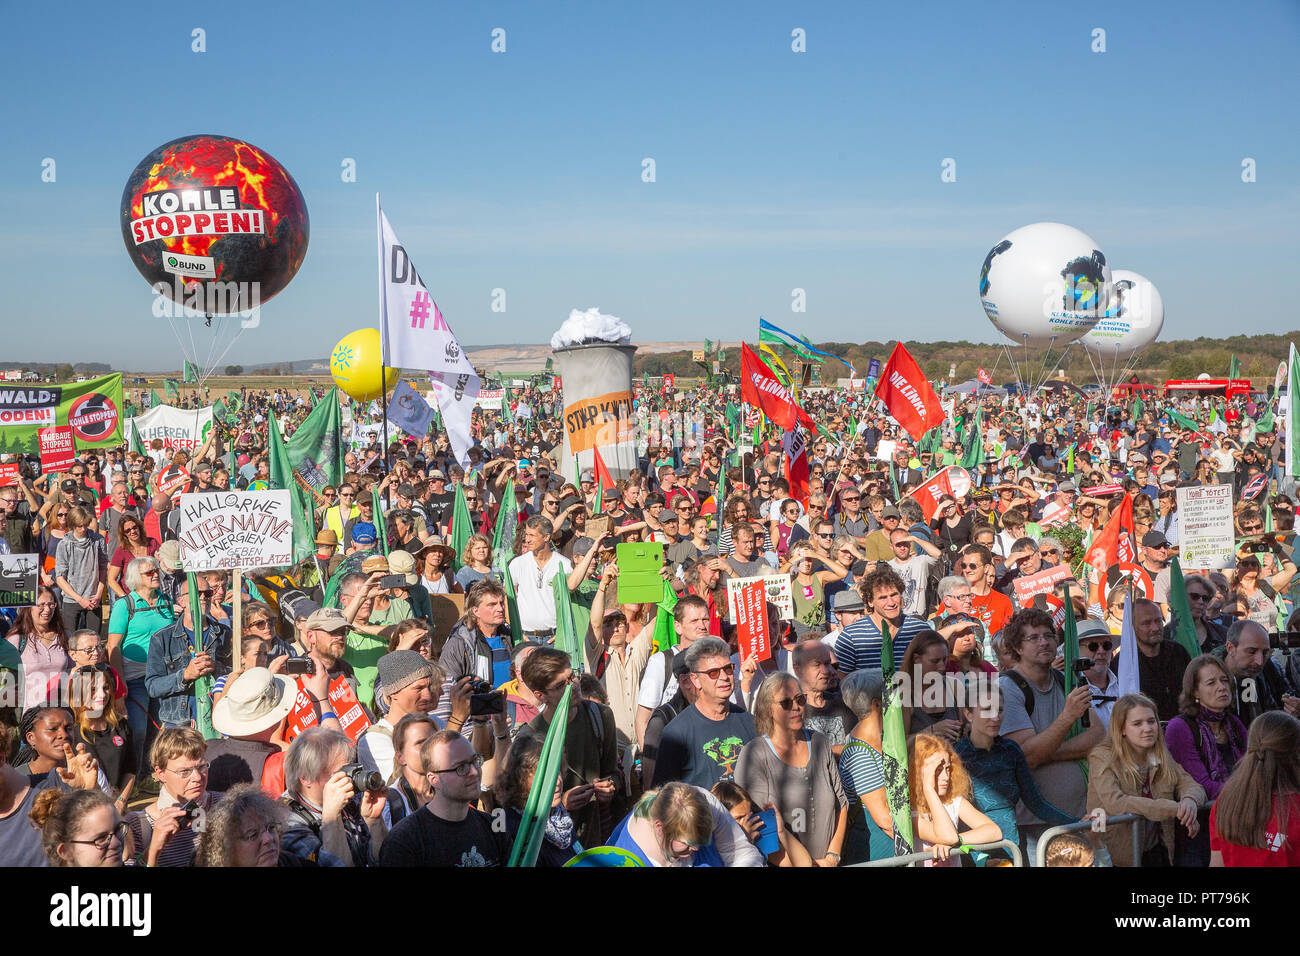 Hambacher, Germany. 6th October 2018. On Saturday (06.10.18) 50,000 people protested with banners, posters and balloons at the Hambacher Forst near Cologne for more climate protection and against lignite mining. Credit: Guido Schiefer/Alamy Live News Stock Photo